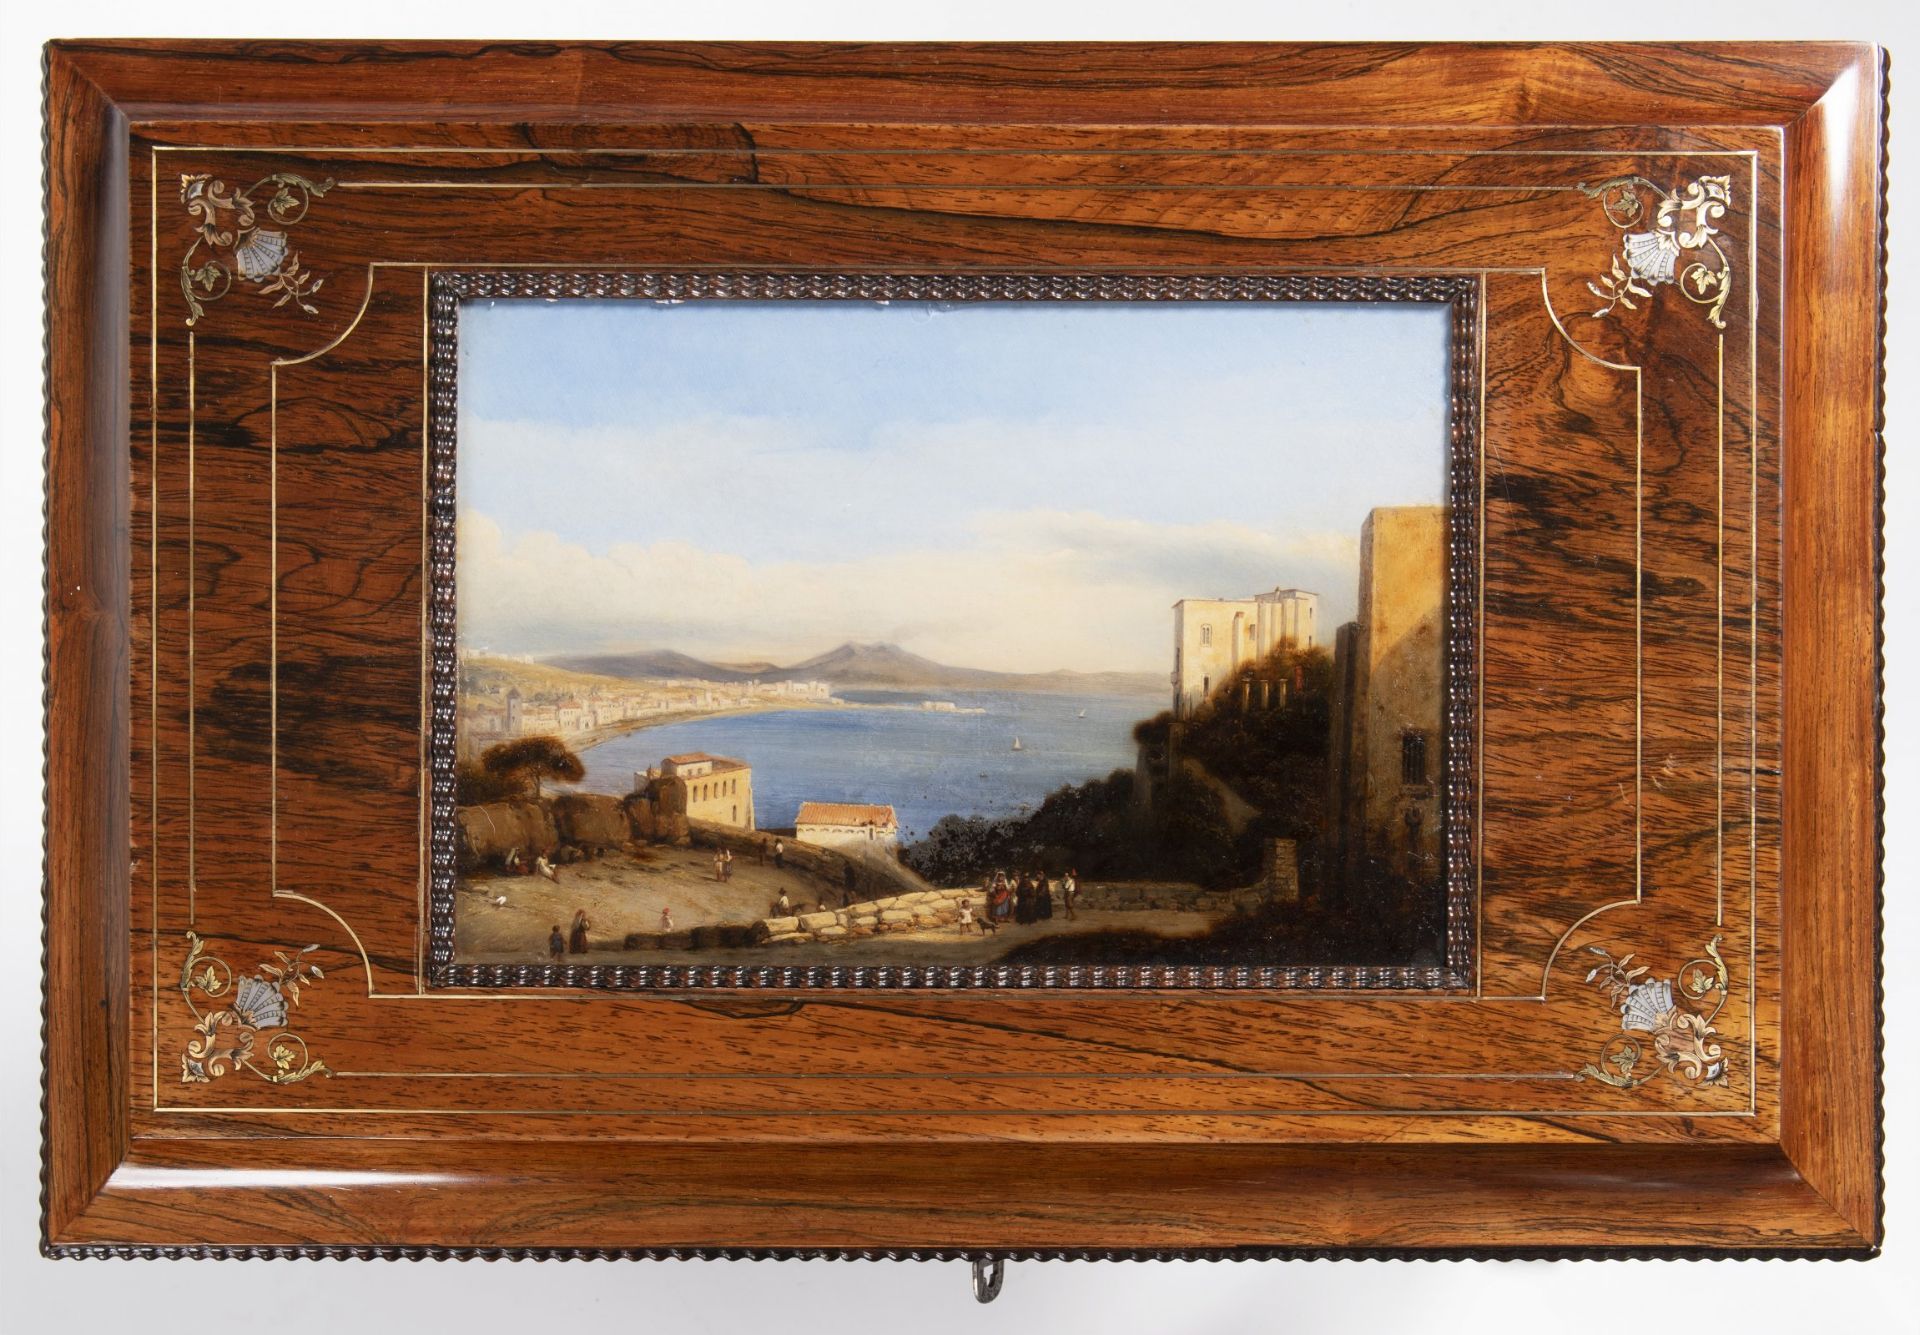 SEWING TABLE WITH A REVERSE GLASS PAINTING Kolem 1840 Italy Naples Rosewood, maple, ebony, pearl, - Bild 2 aus 2